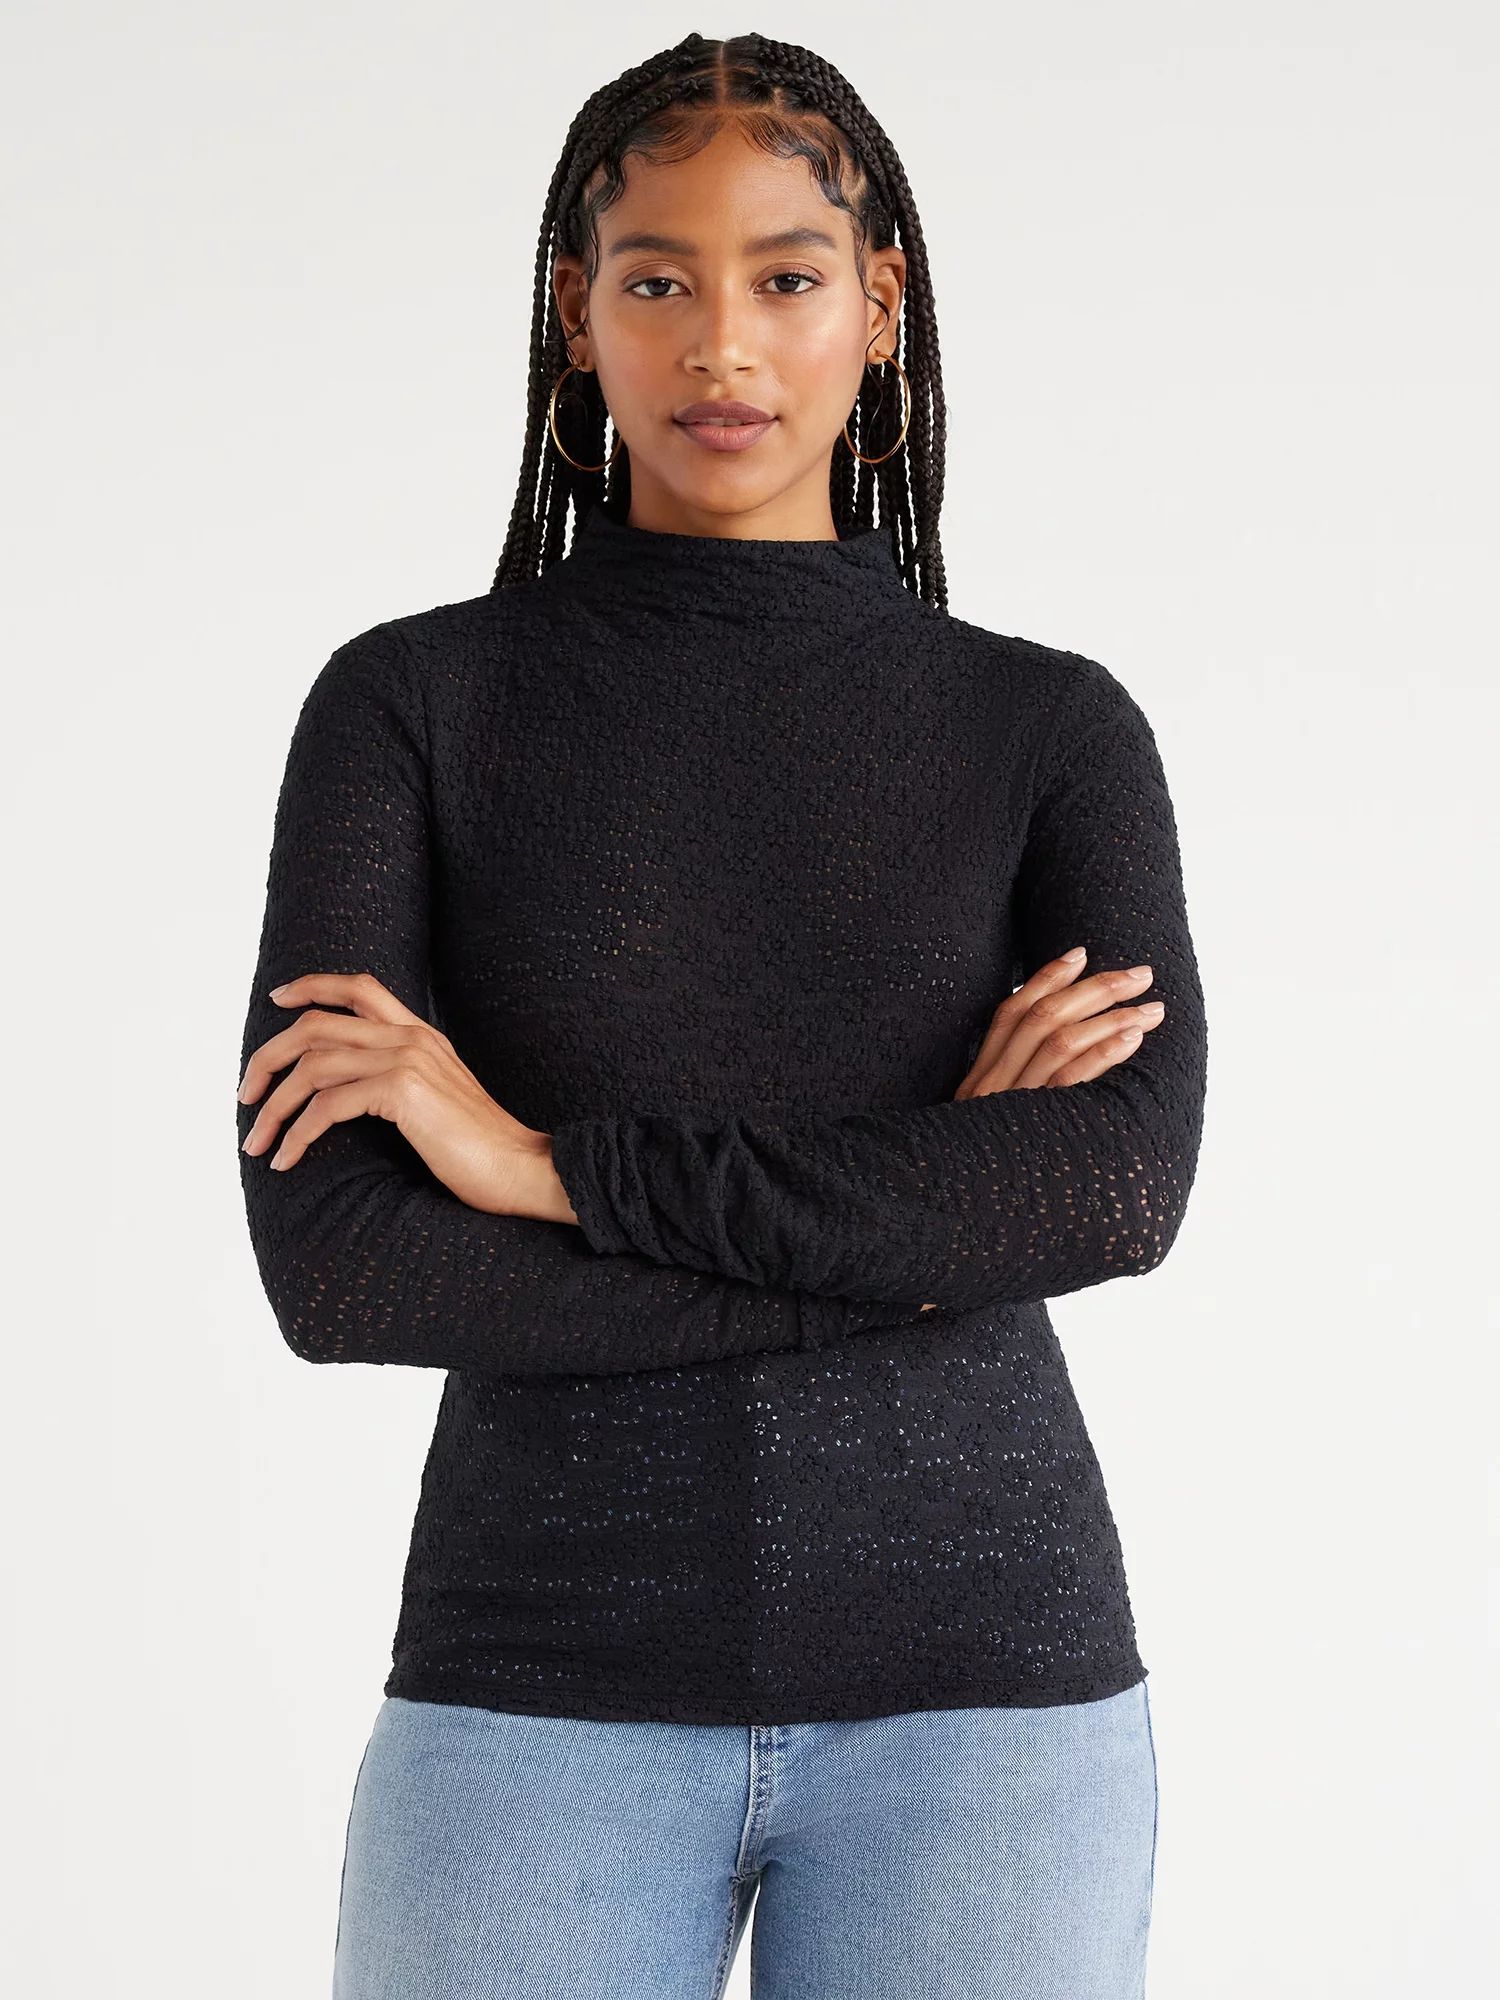 Scoop Women's Lace Turtleneck Top with Long Sleeves, Sizes XS-XXL | Walmart (US)